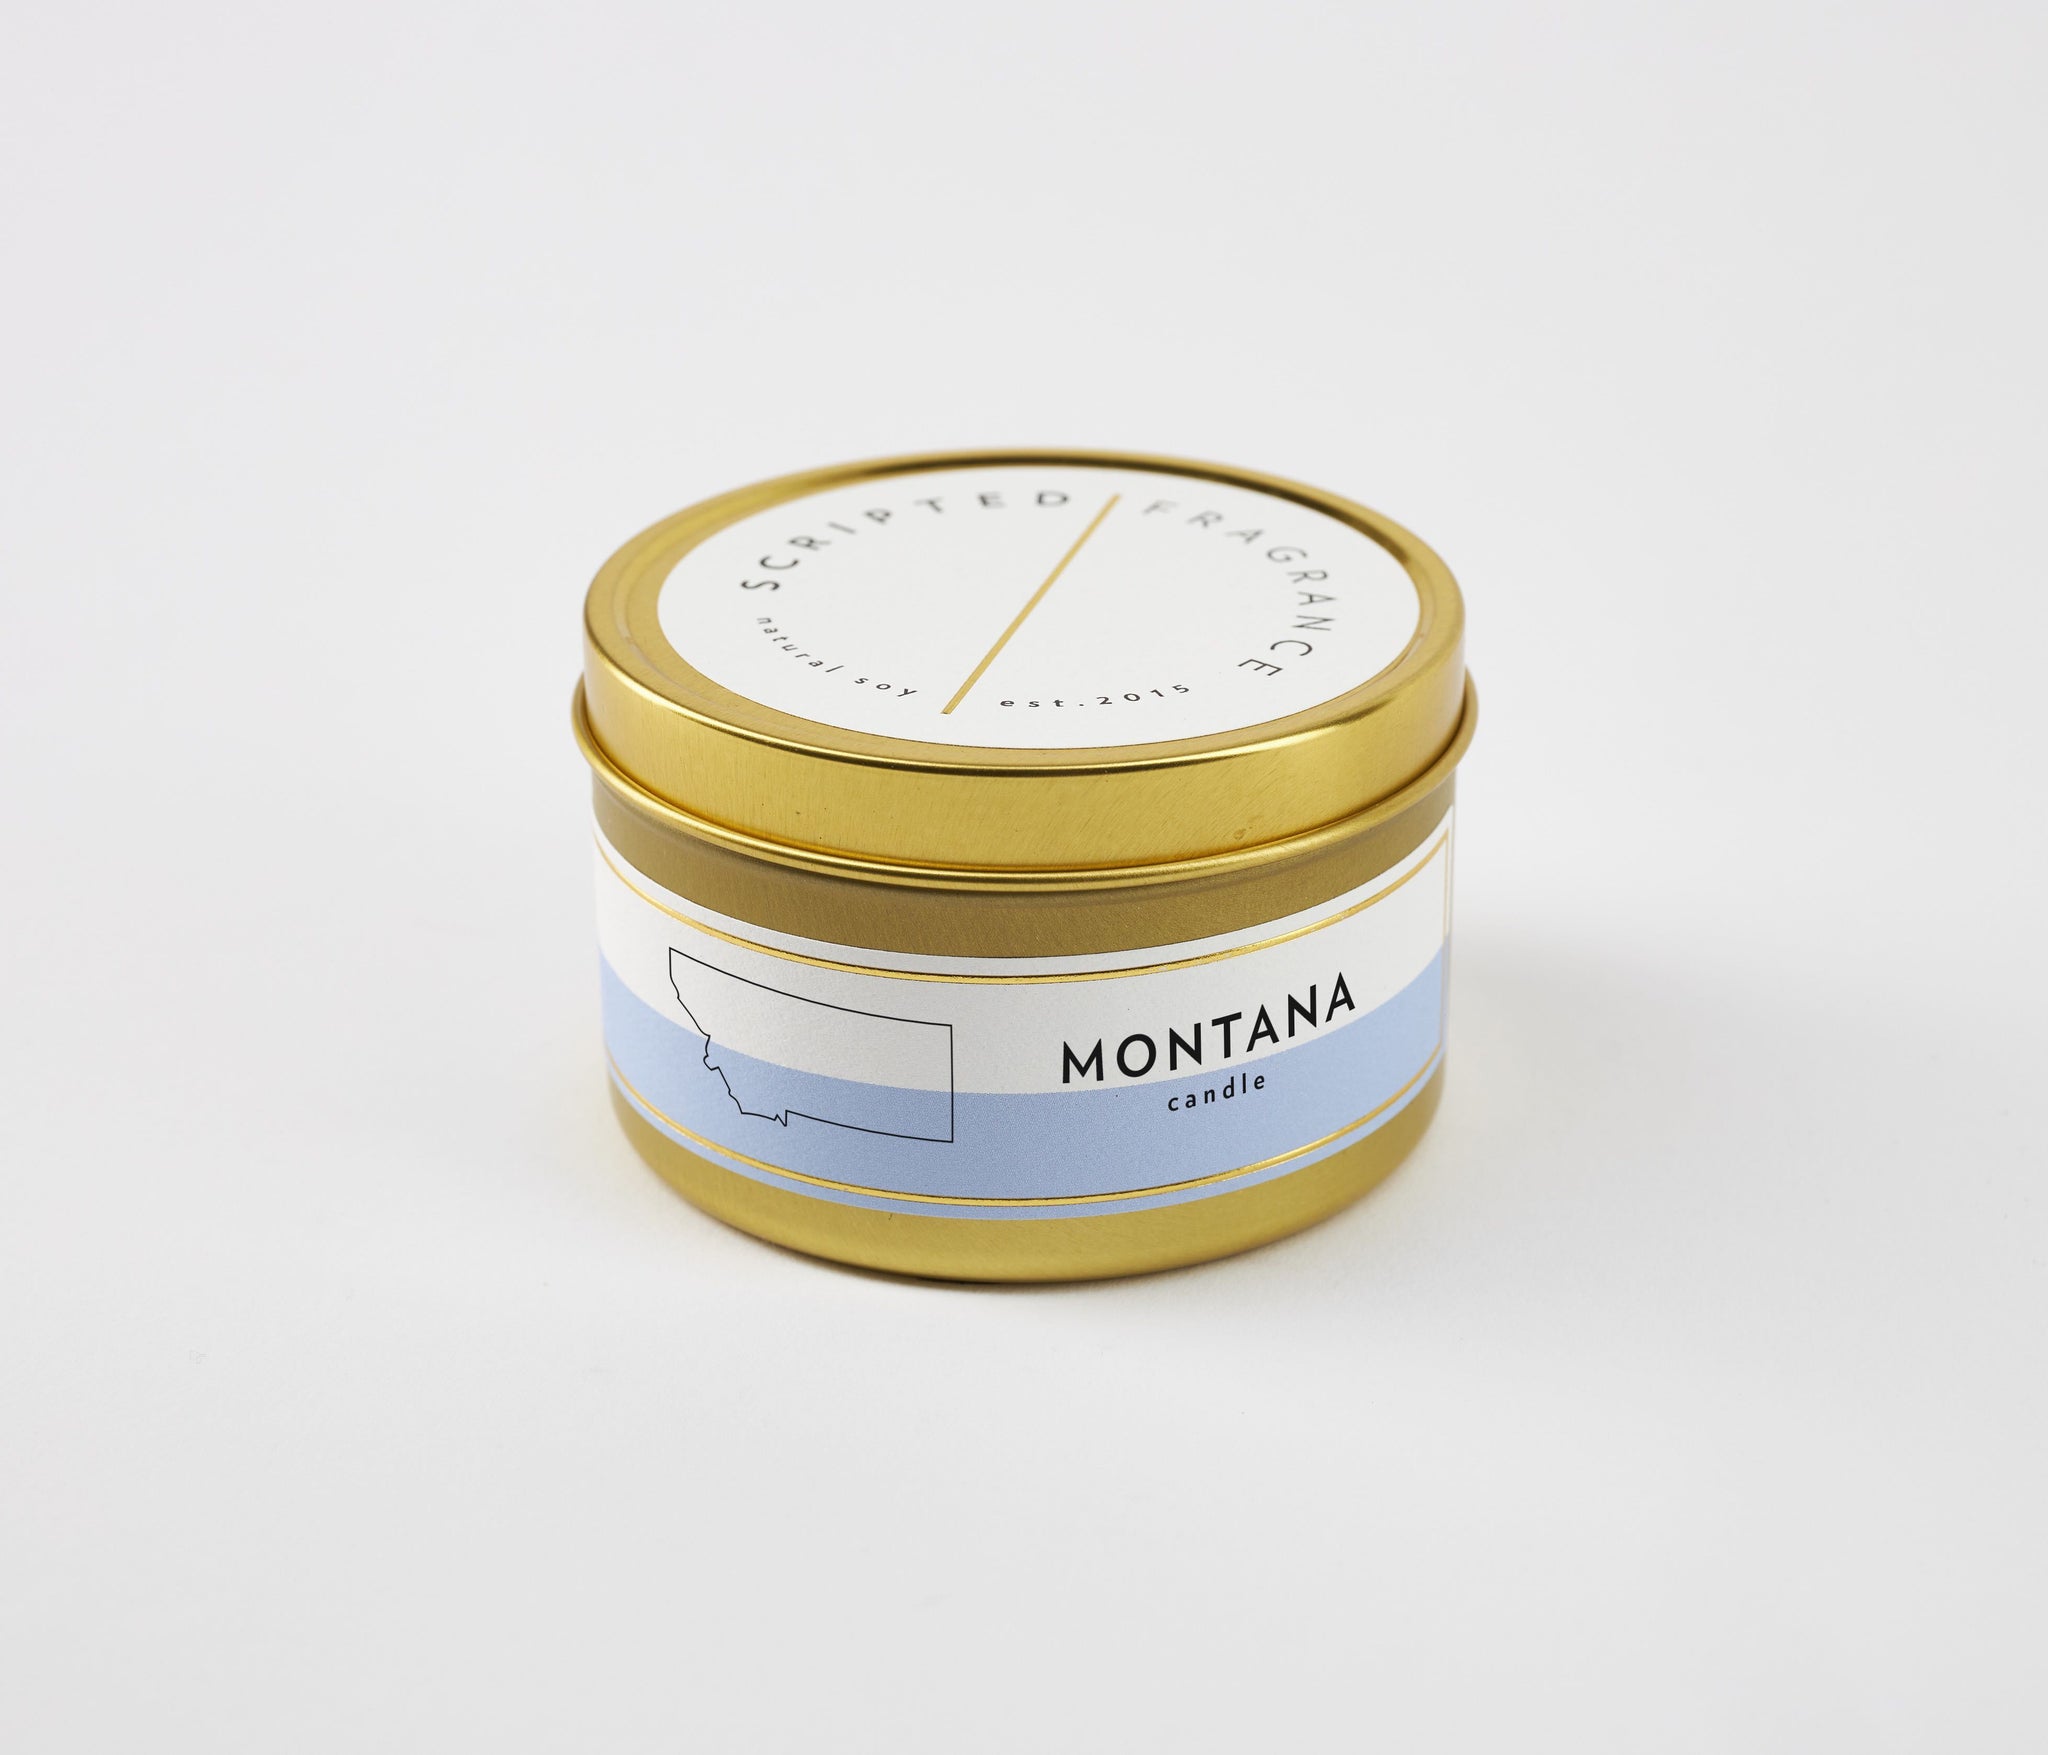 Montana State Soy Candle